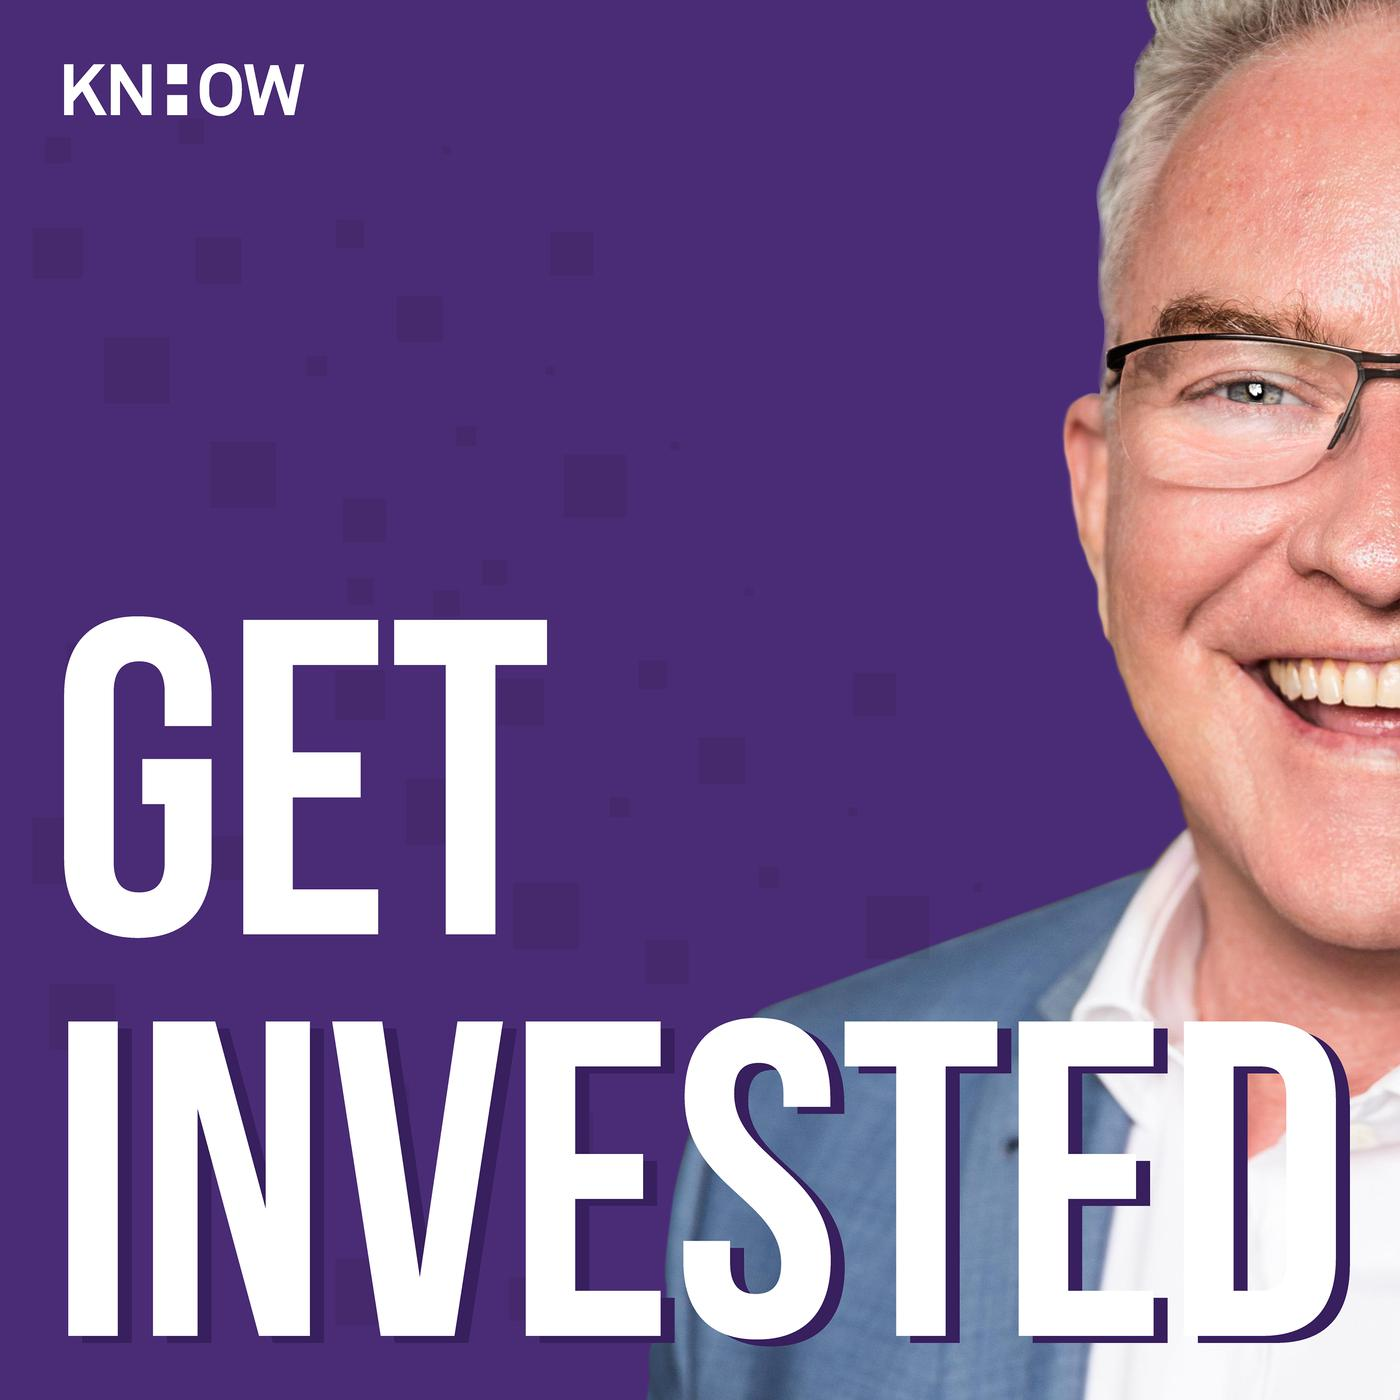 Get Invested: Kobi Simmat on building an investment others want to buy